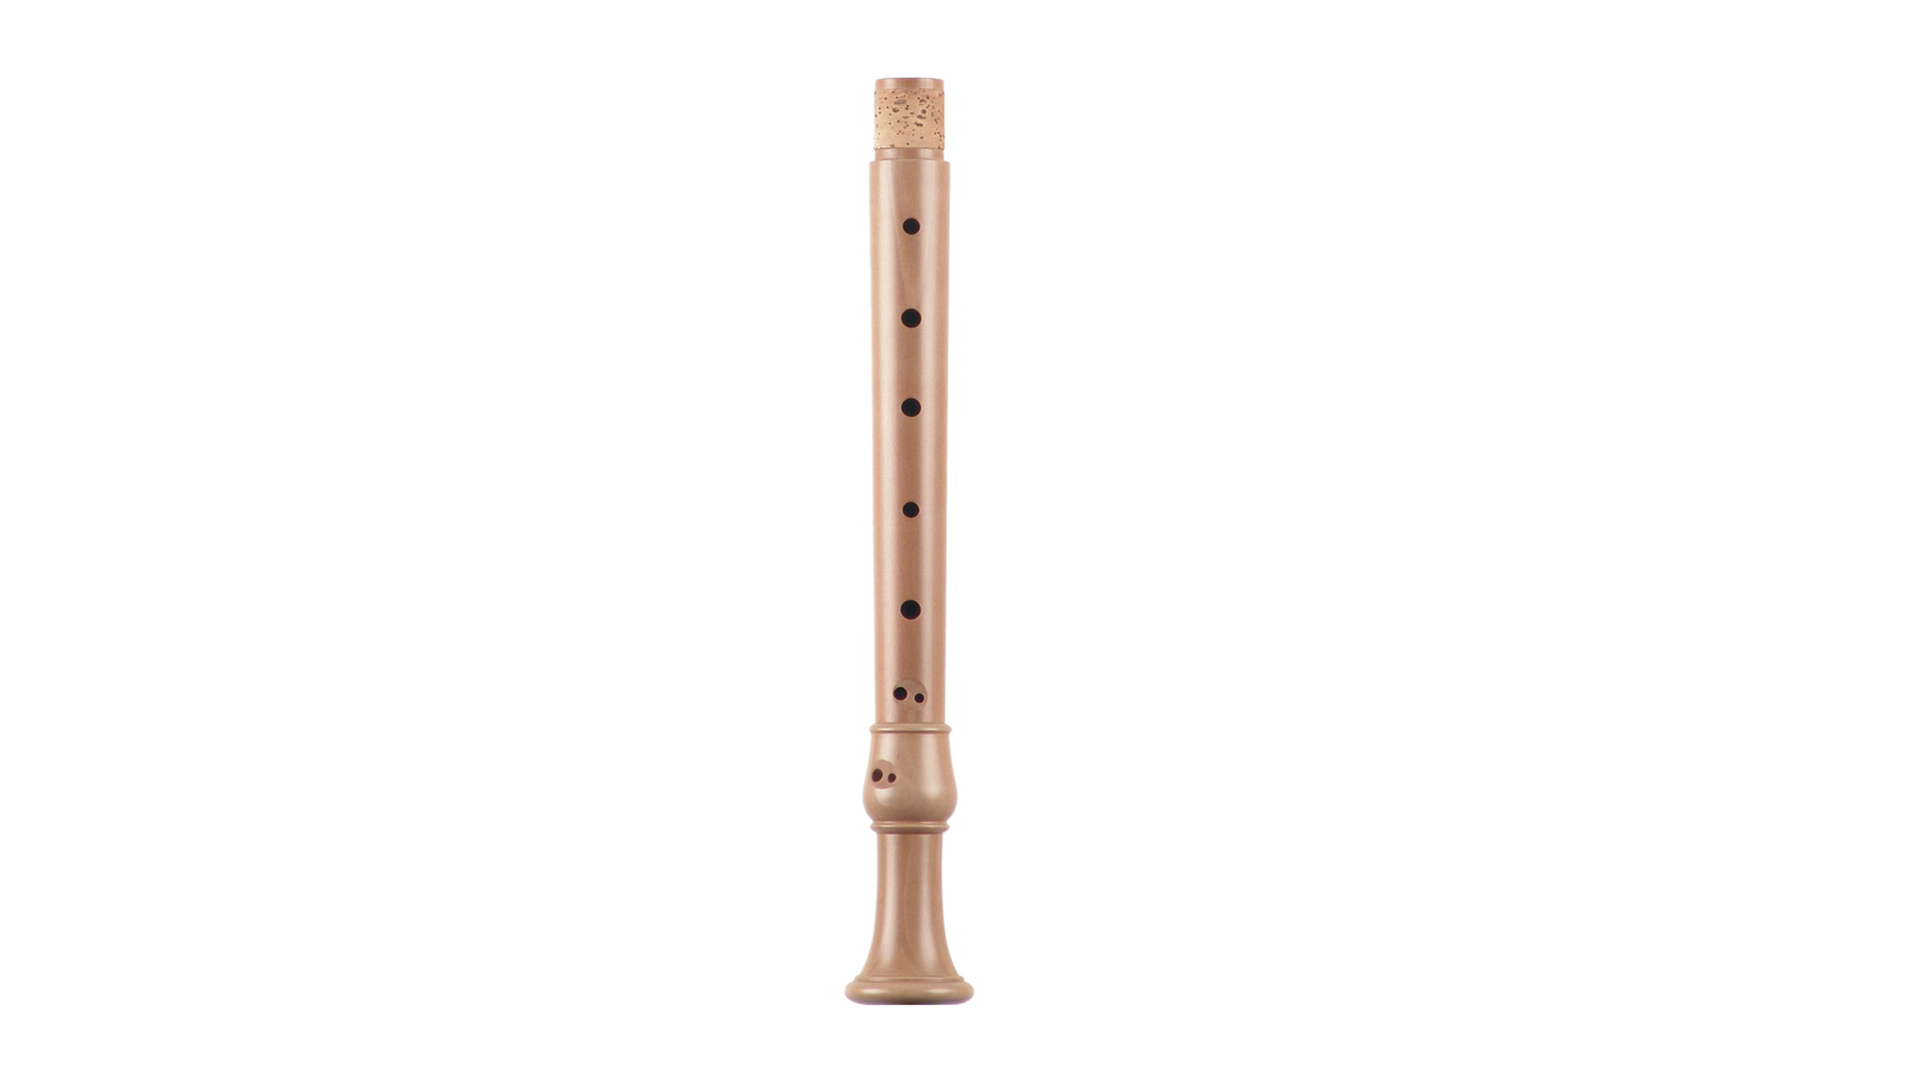 Moeck, "Flauto Rondo", alto in f', baroque double hole, pearwood